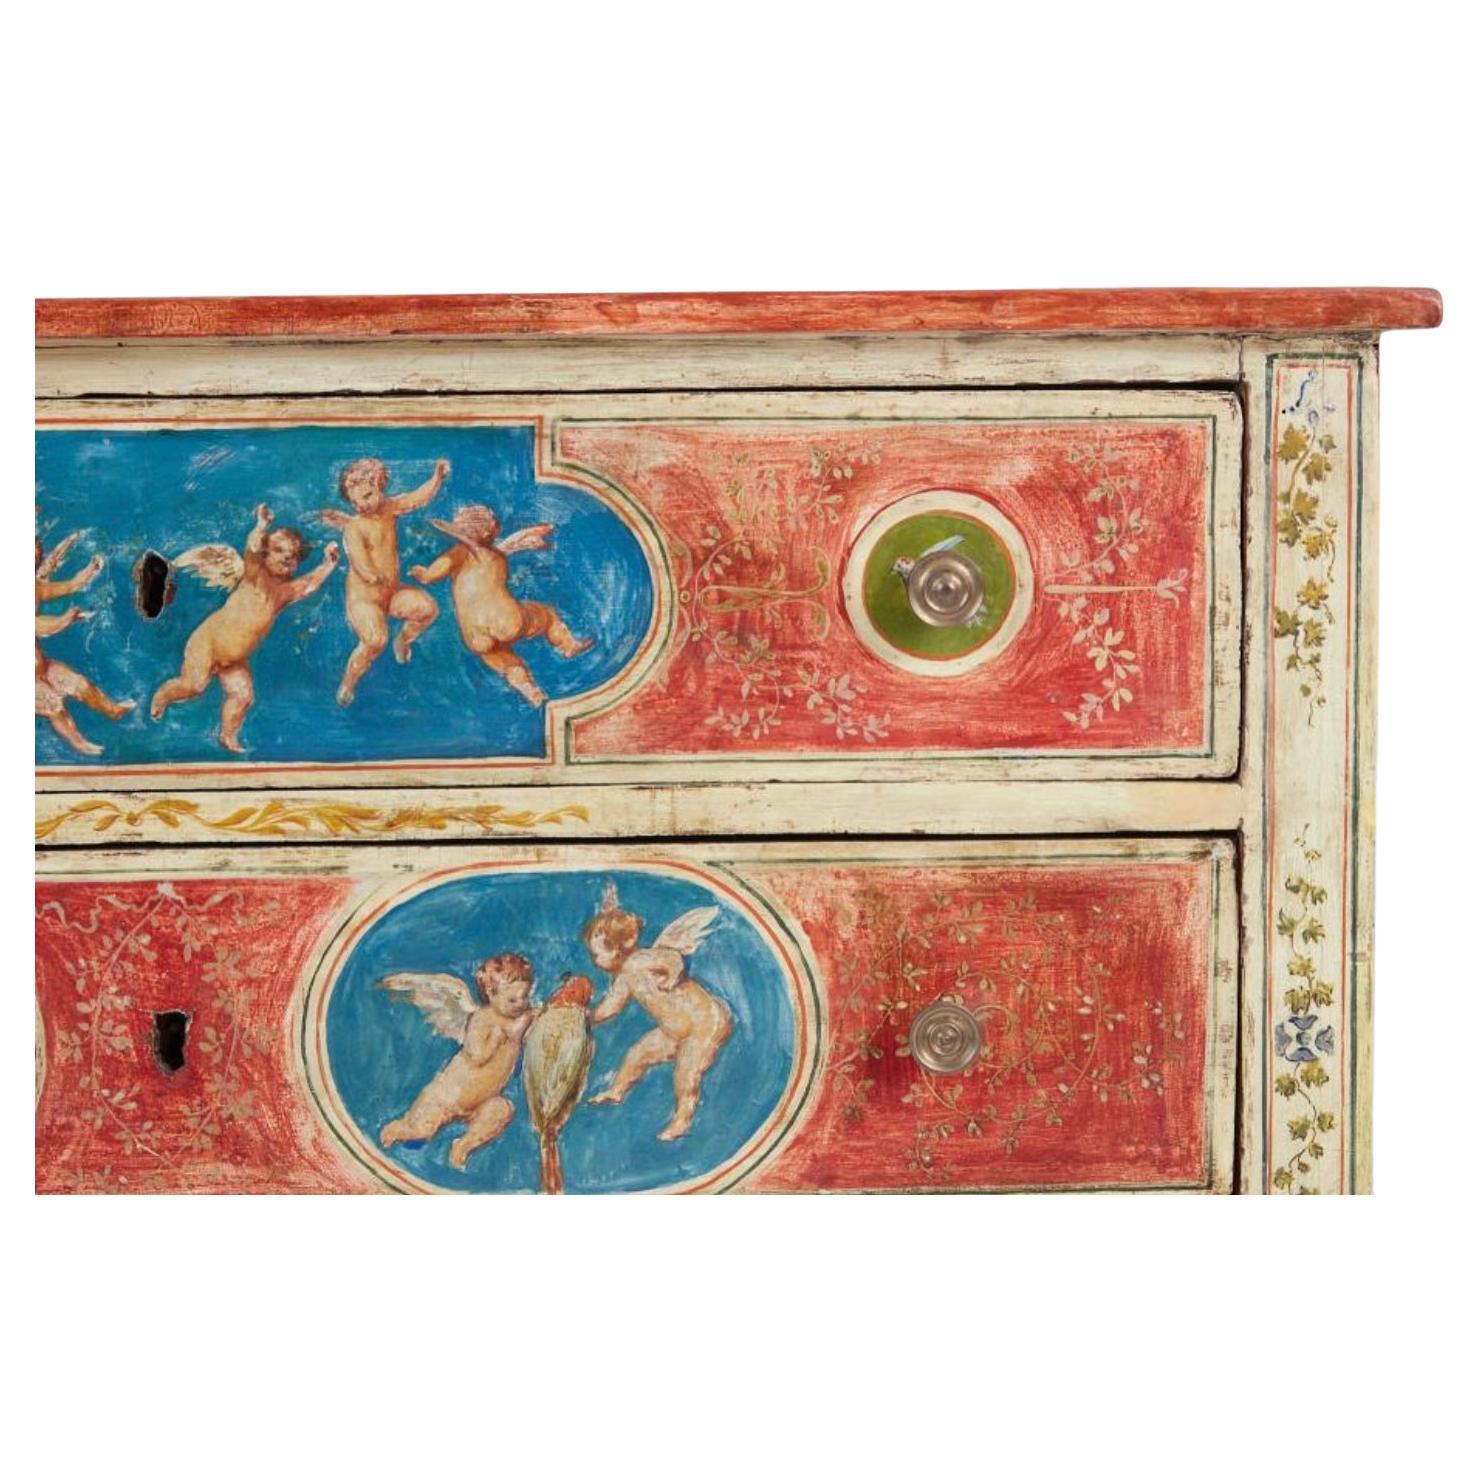 Late 18th century Italian neoclassical polychrome decorated commode. Features three large drawers decorated in red and blue with angels and birds in center of drawer fronts and on center top/sides of chest. Cream colored edges on chest have sprigs